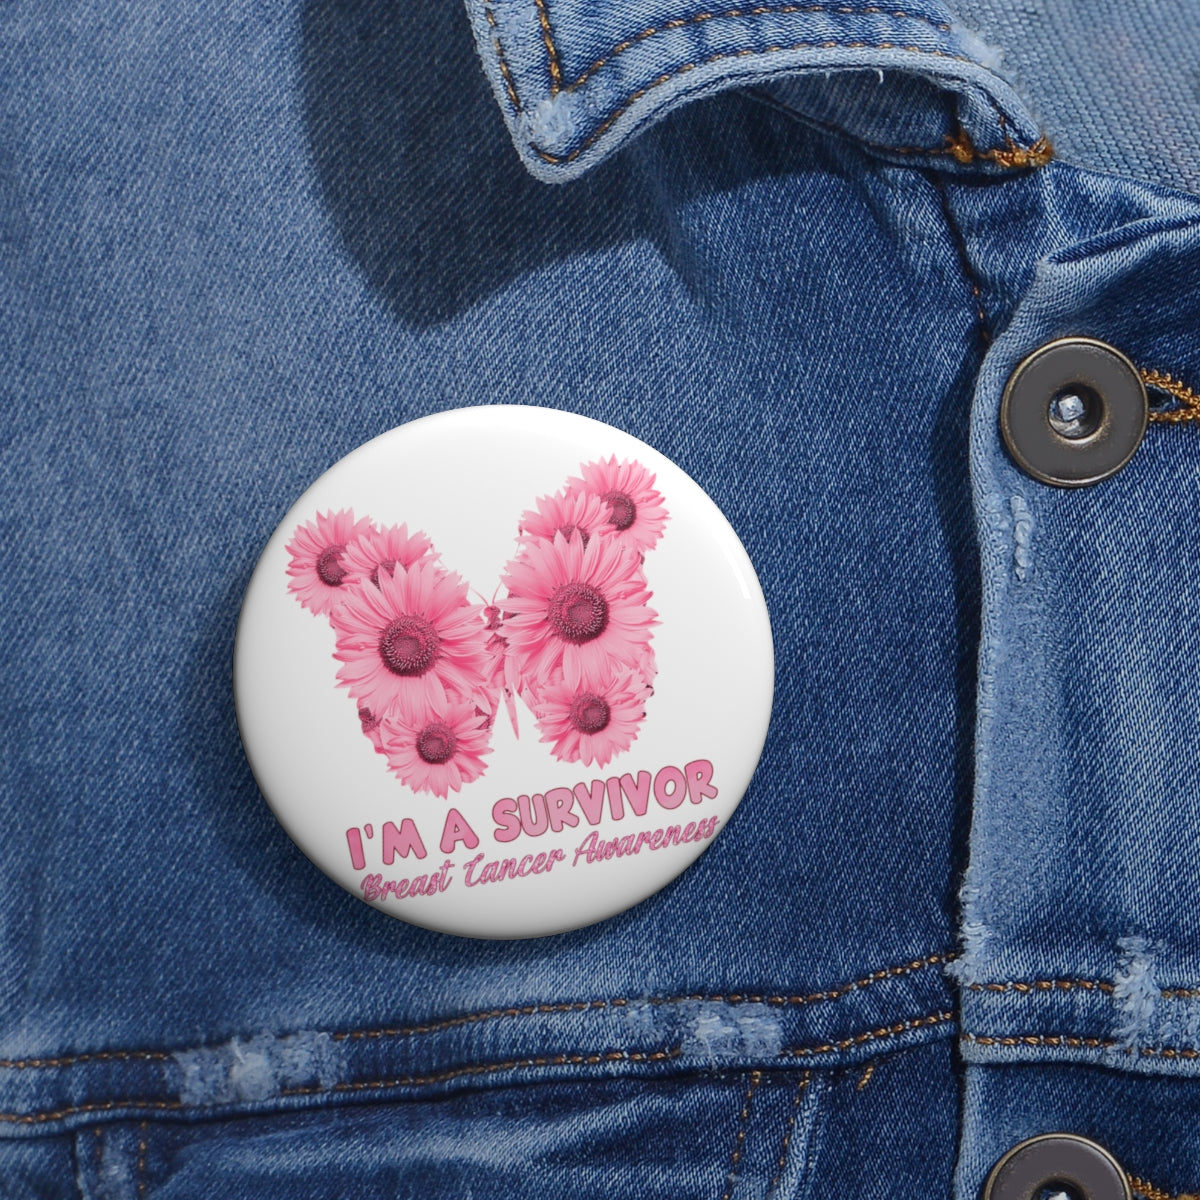 I'm a Survivor Pin Buttons| Breast Cancer Awareness Pin Back Buttons